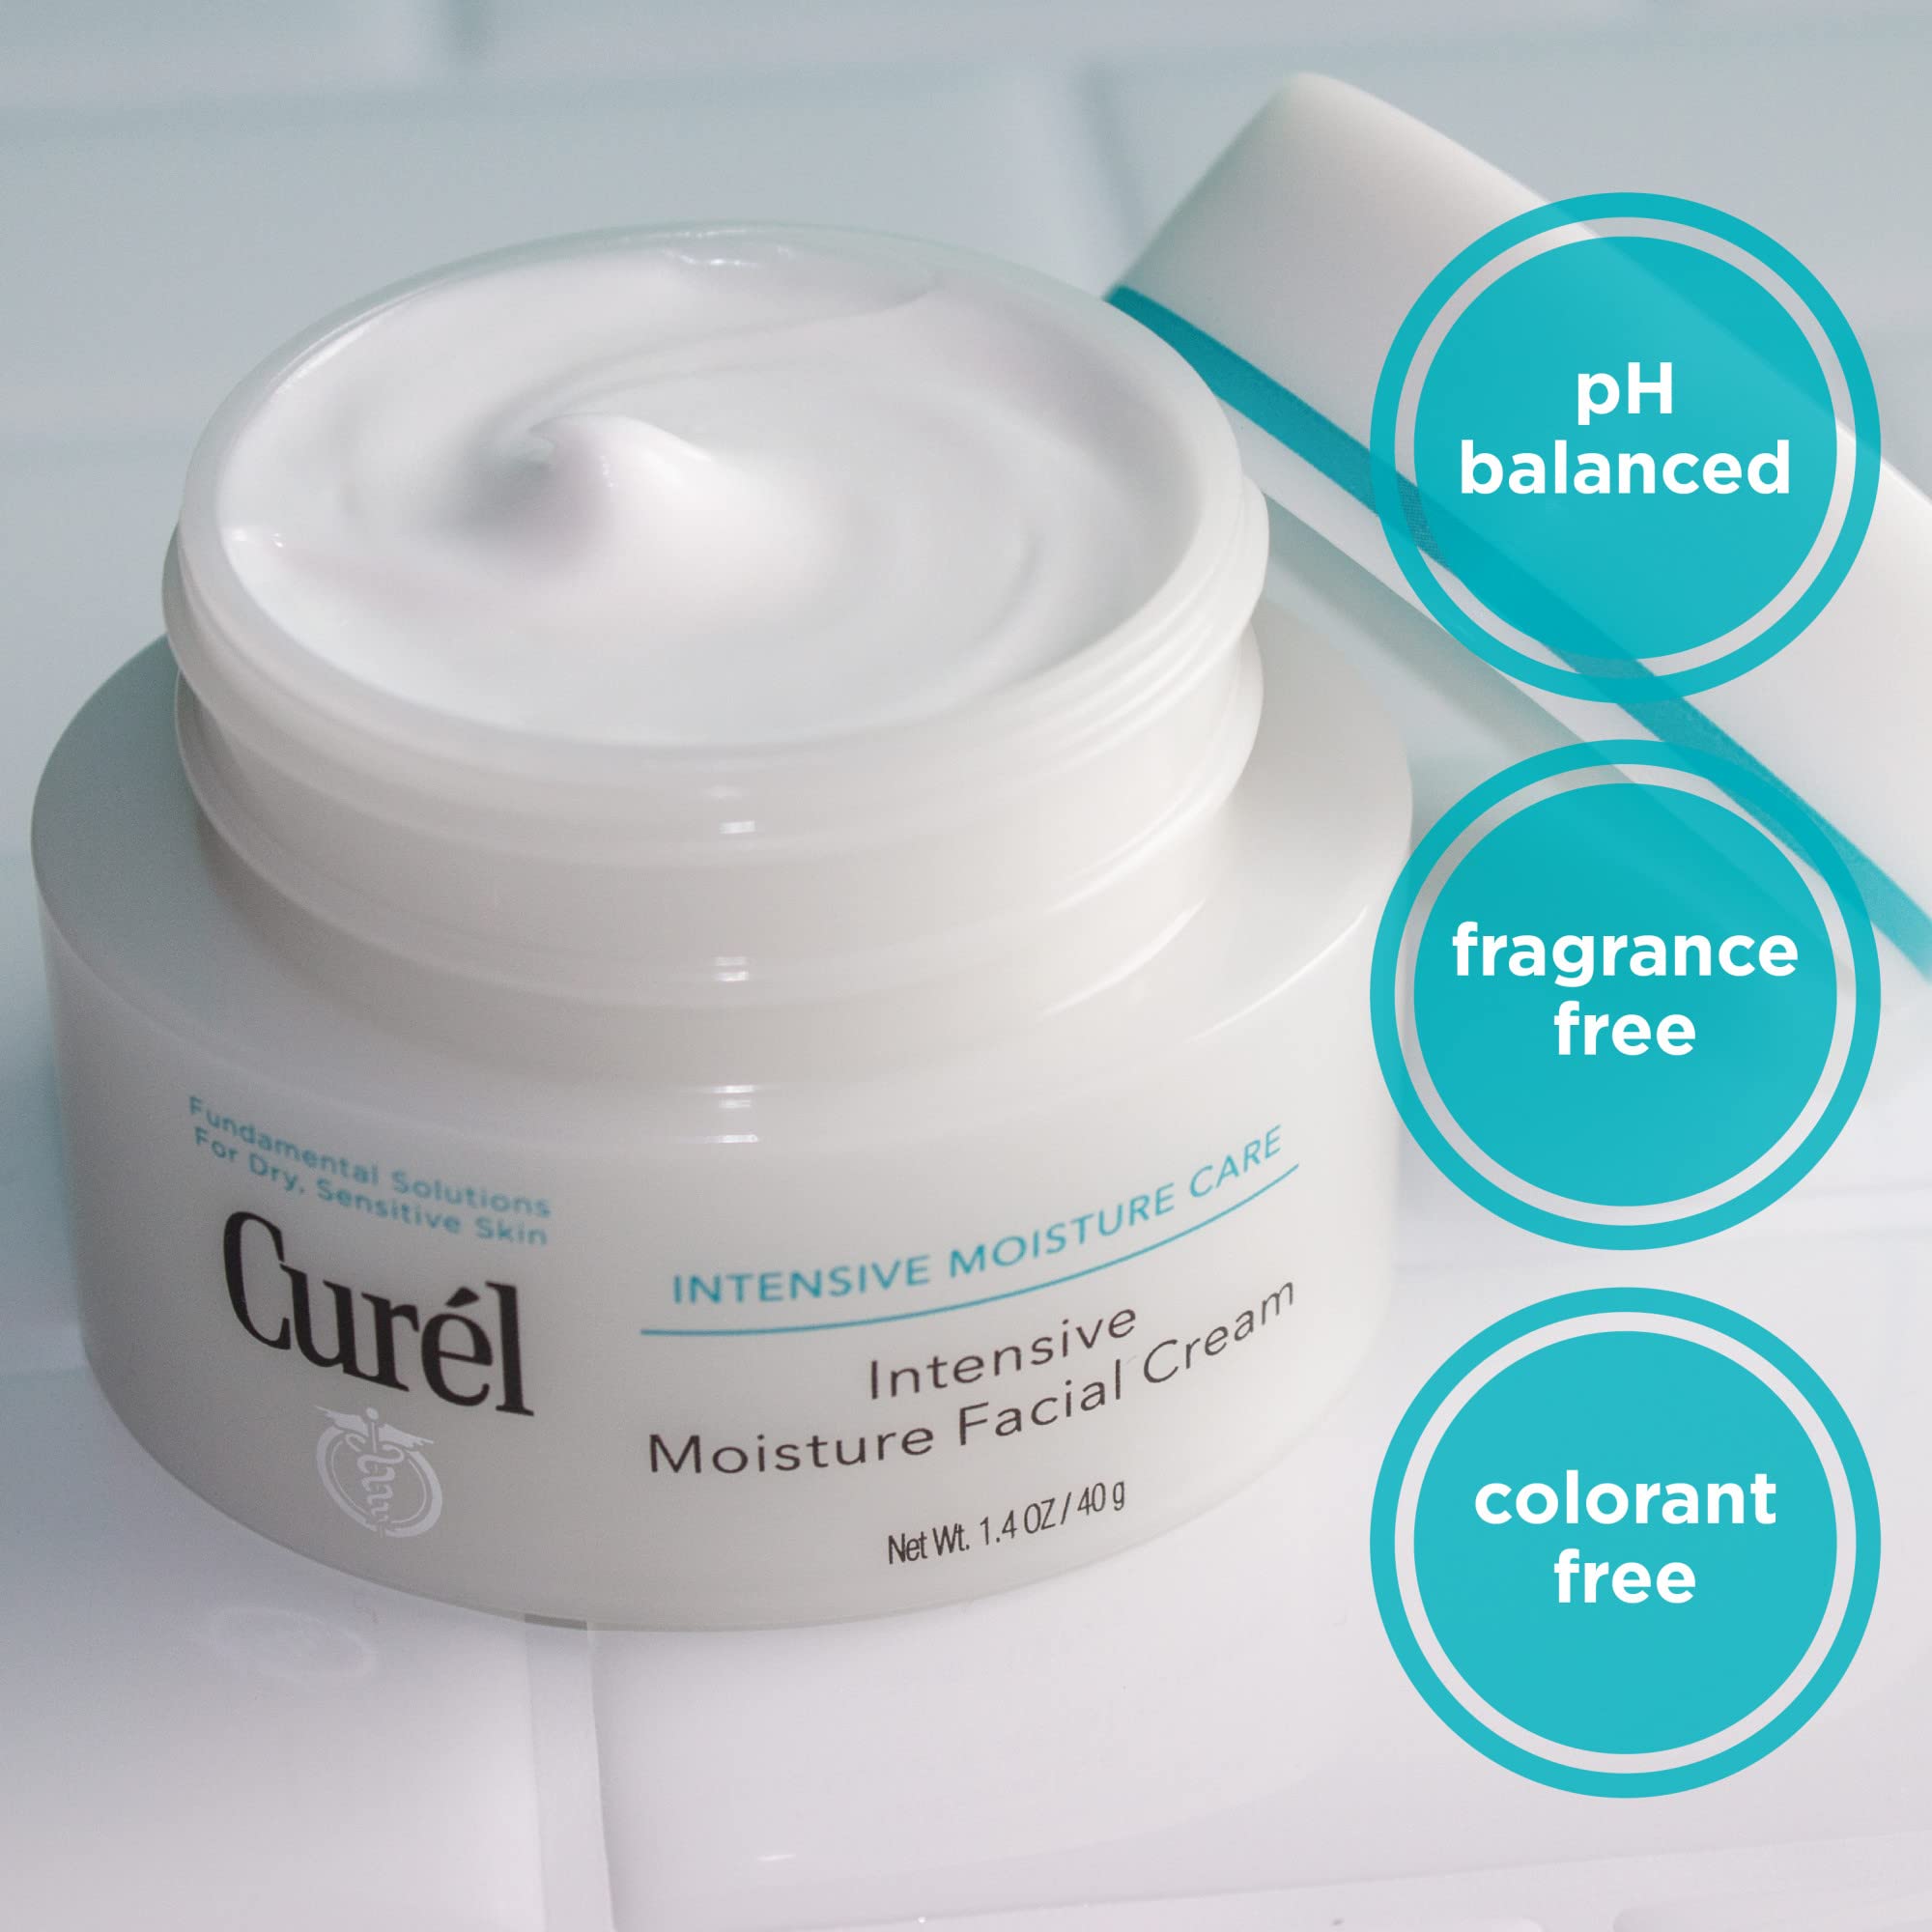 Curel Japanese Skin Care Intensive Face Moisturizer Cream, Face Lotion for Dry to Very Dry Sensitive Skin, For Women and Men, Anti-Aging Fragrance-Free Anti-Wrinkle Japanese Skin Care, 1.4 oz